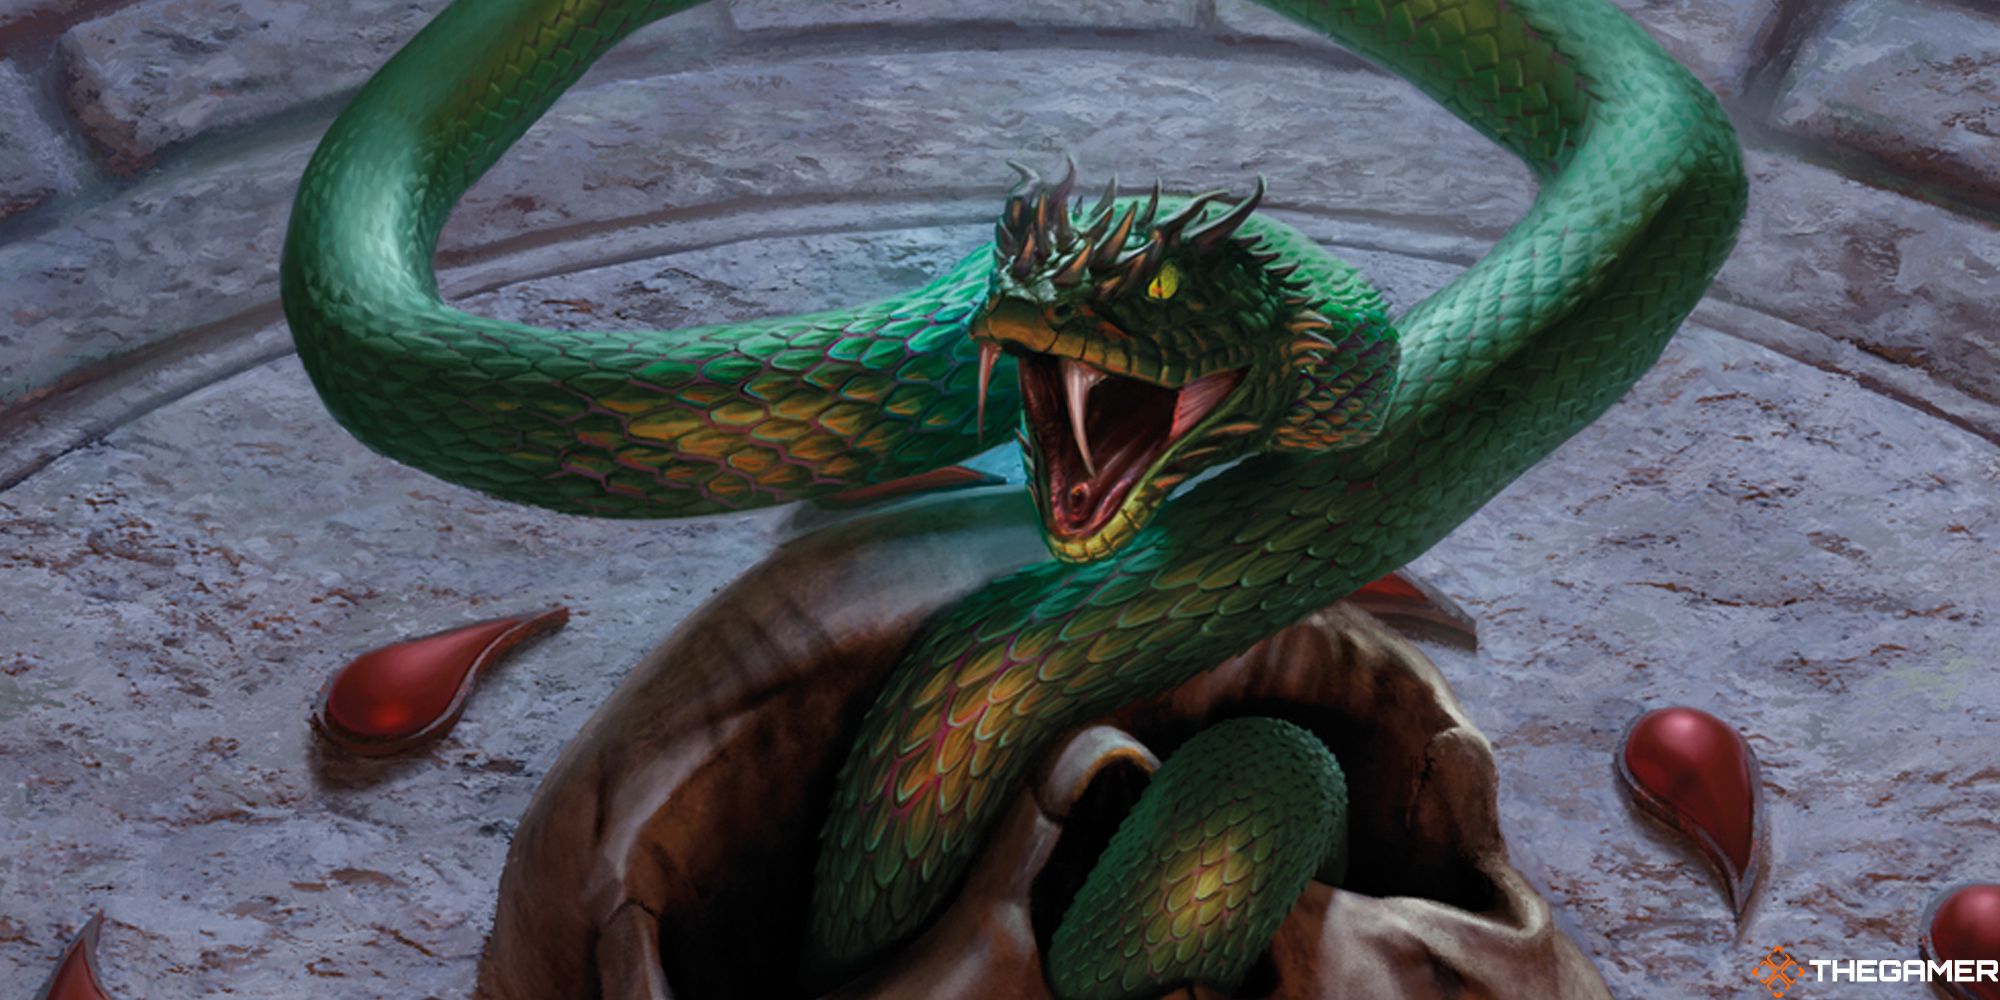 A snake crawling out of a skull in D&D